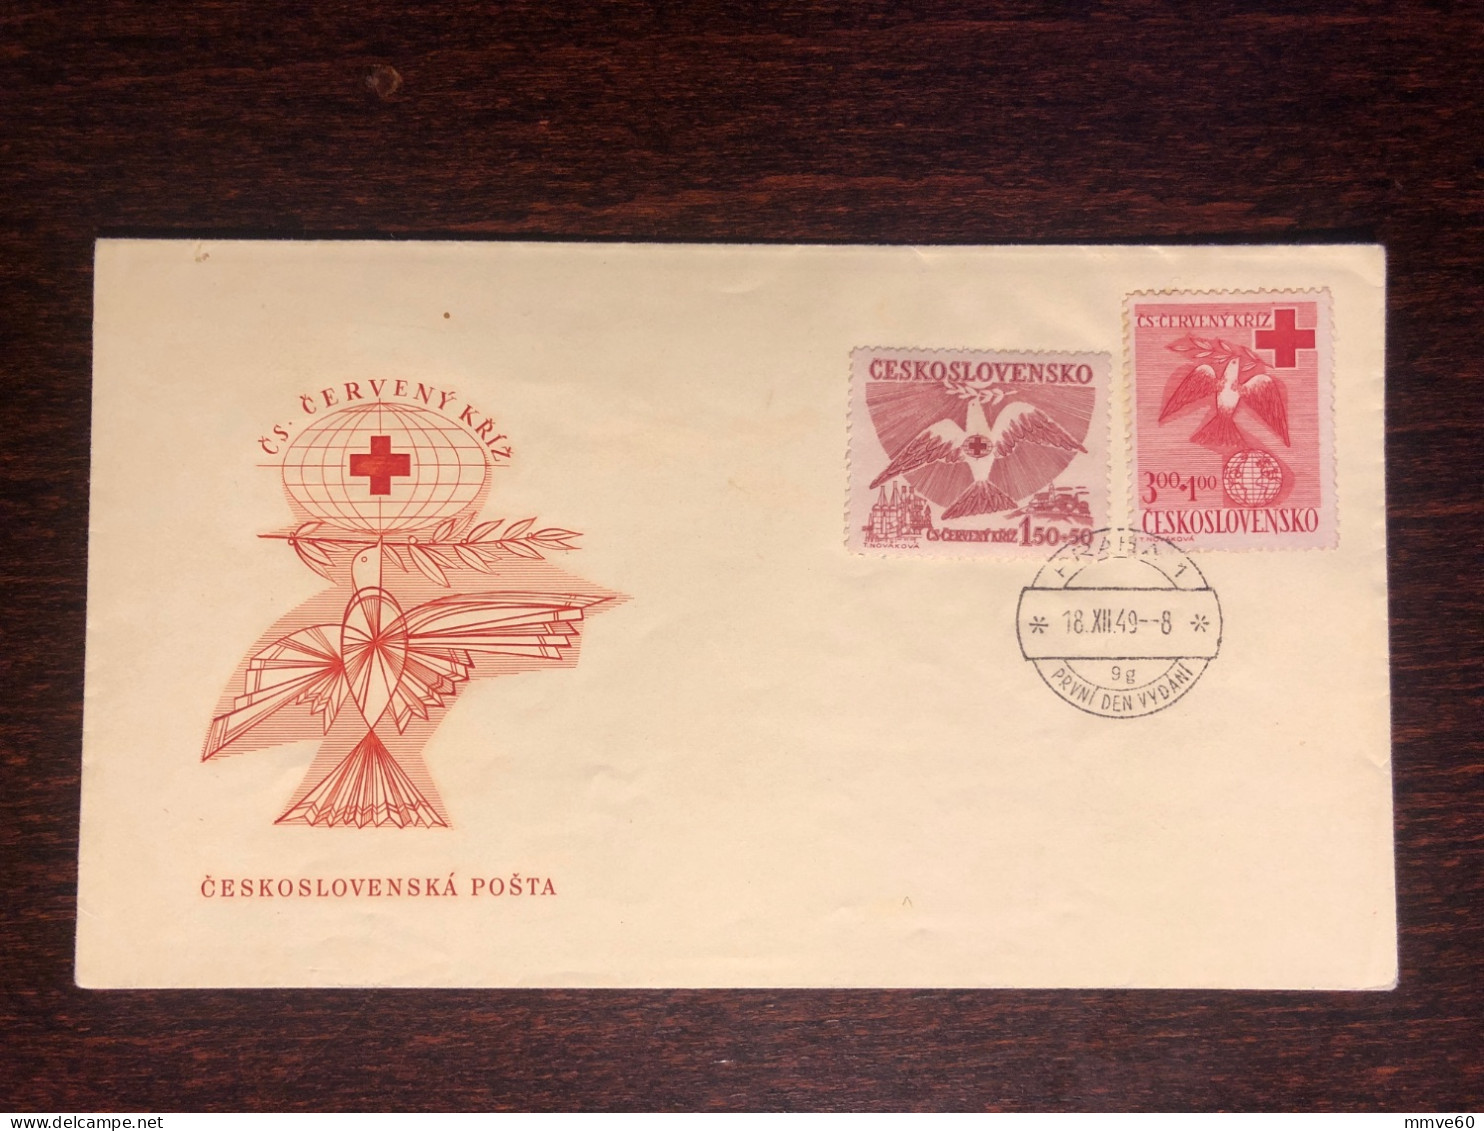 CZECHOSLOVAKIA FDC COVER 1949 YEAR RED CROSS HEALTH MEDICINE STAMPS - FDC